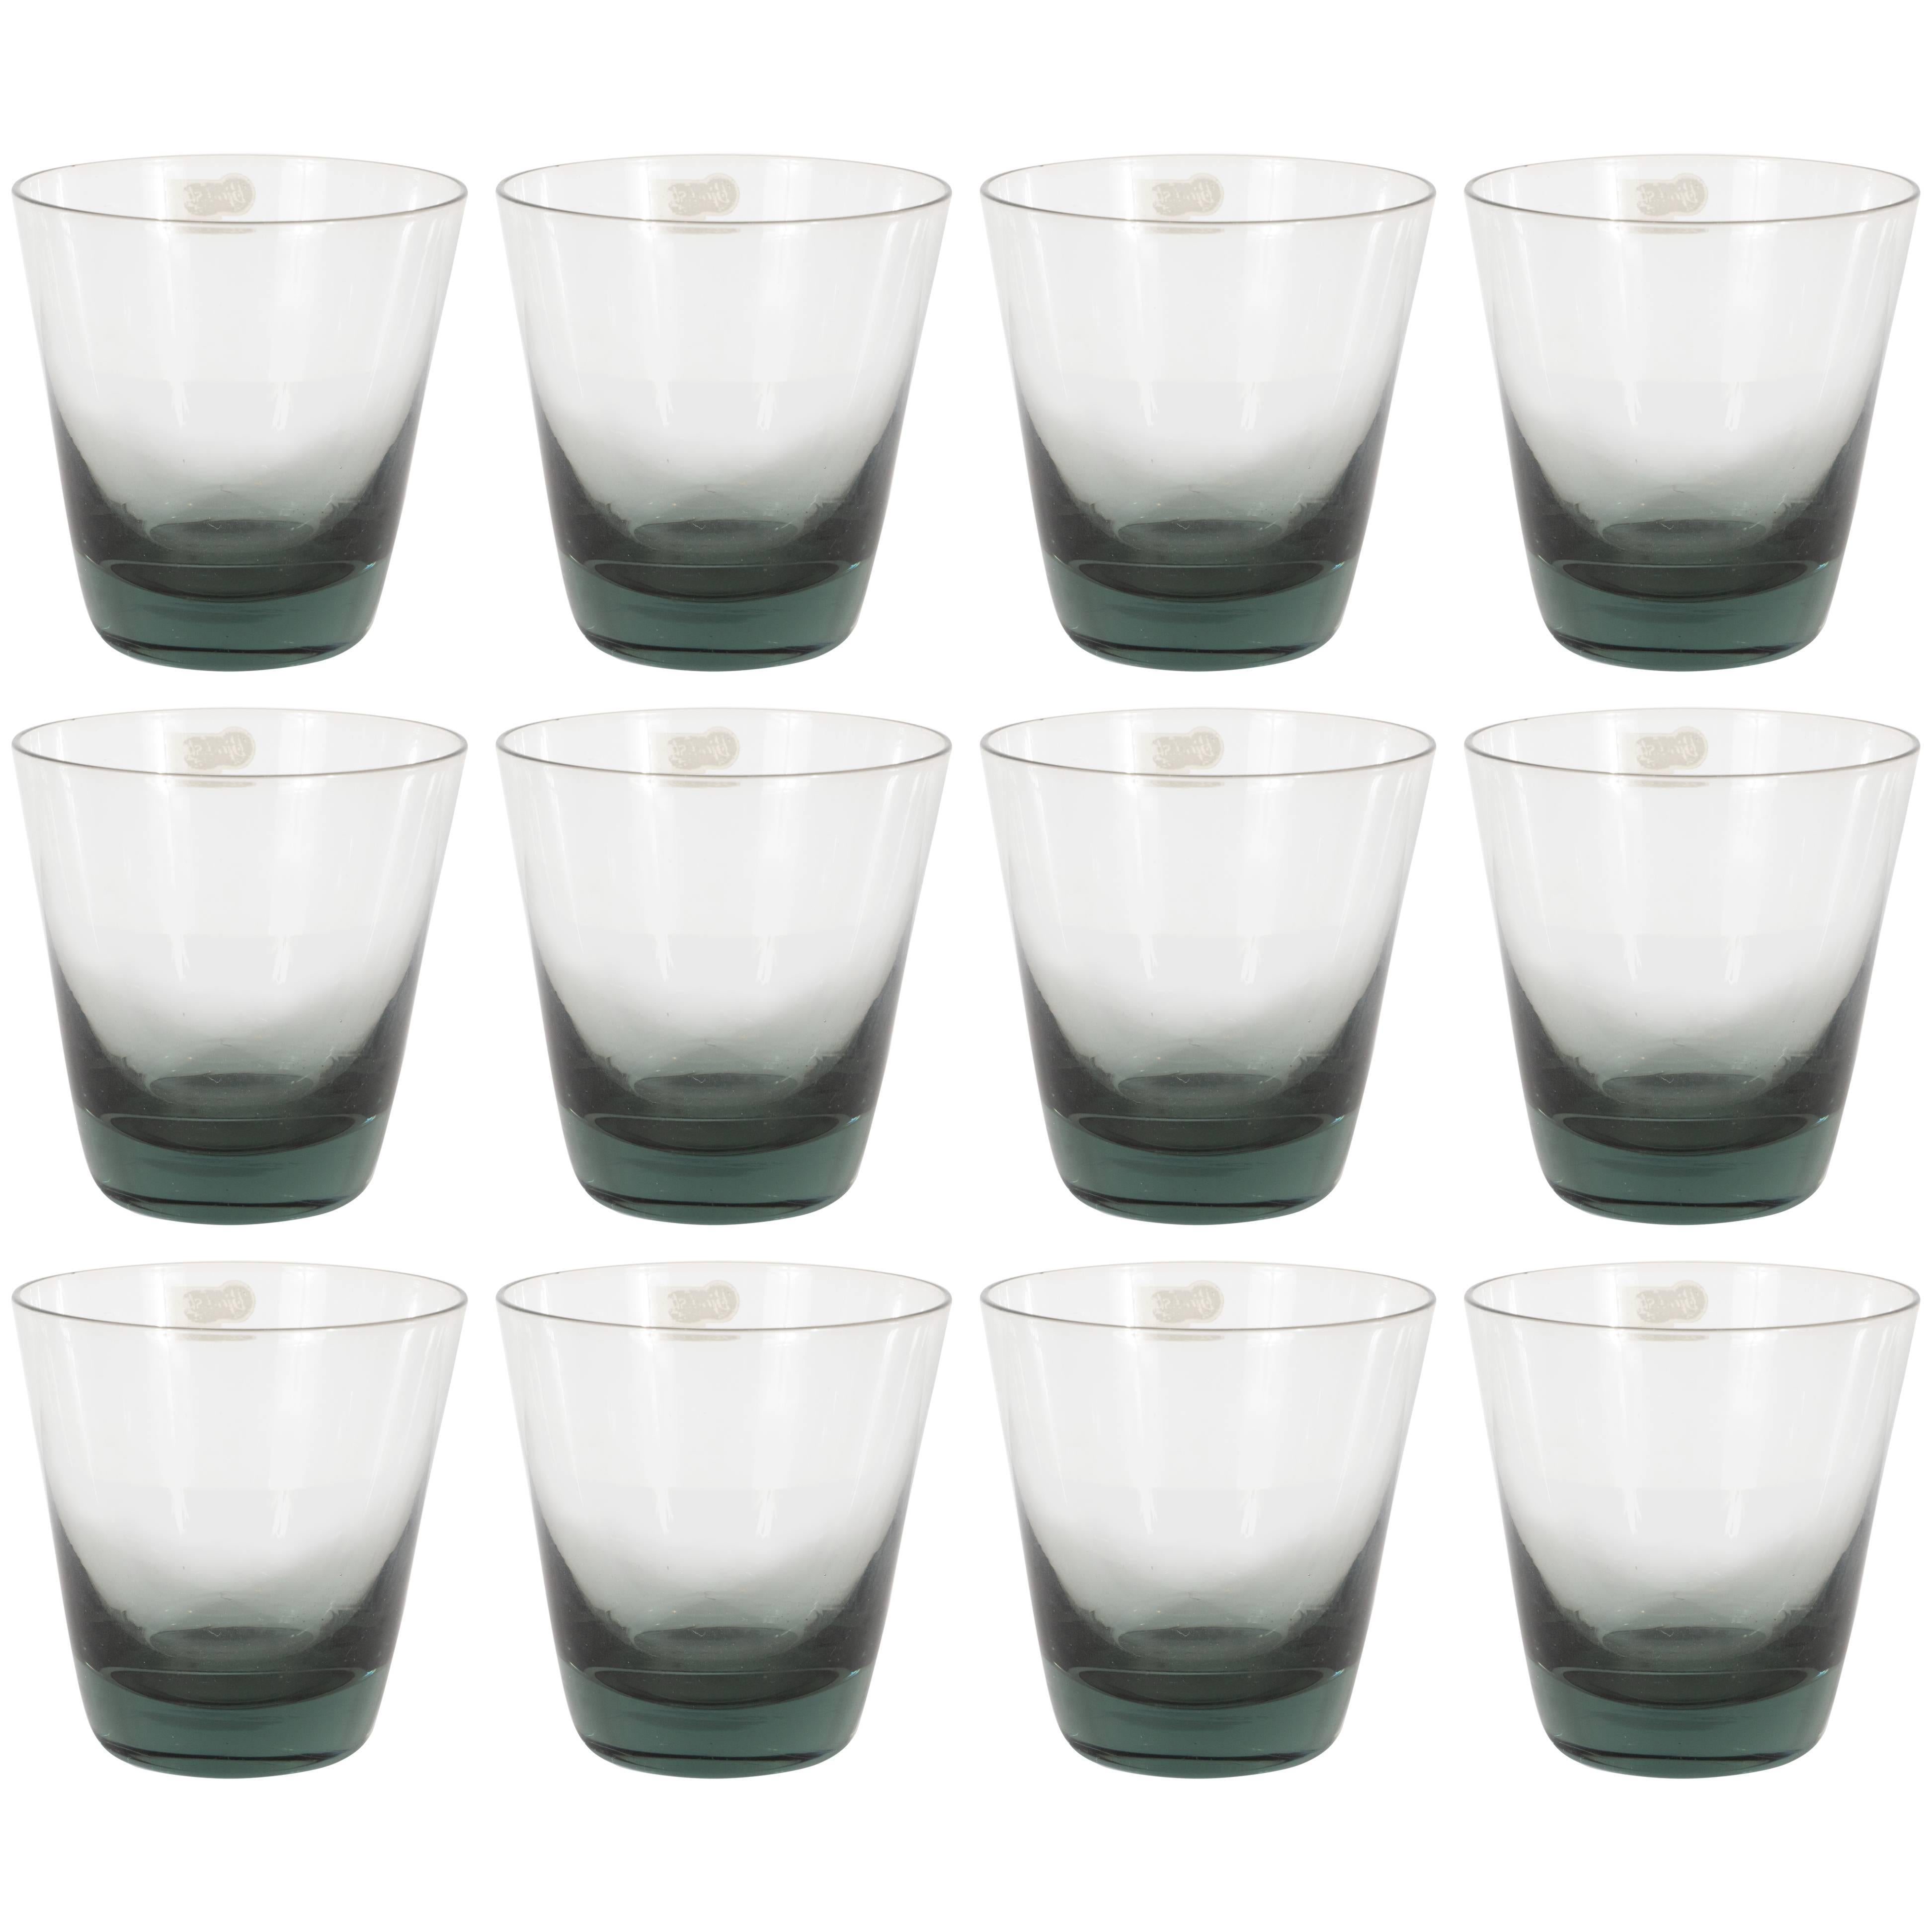 Set of 12 Mid-Century Modern Swedish Smoked Gray Low Ball Glasses by Björkshult